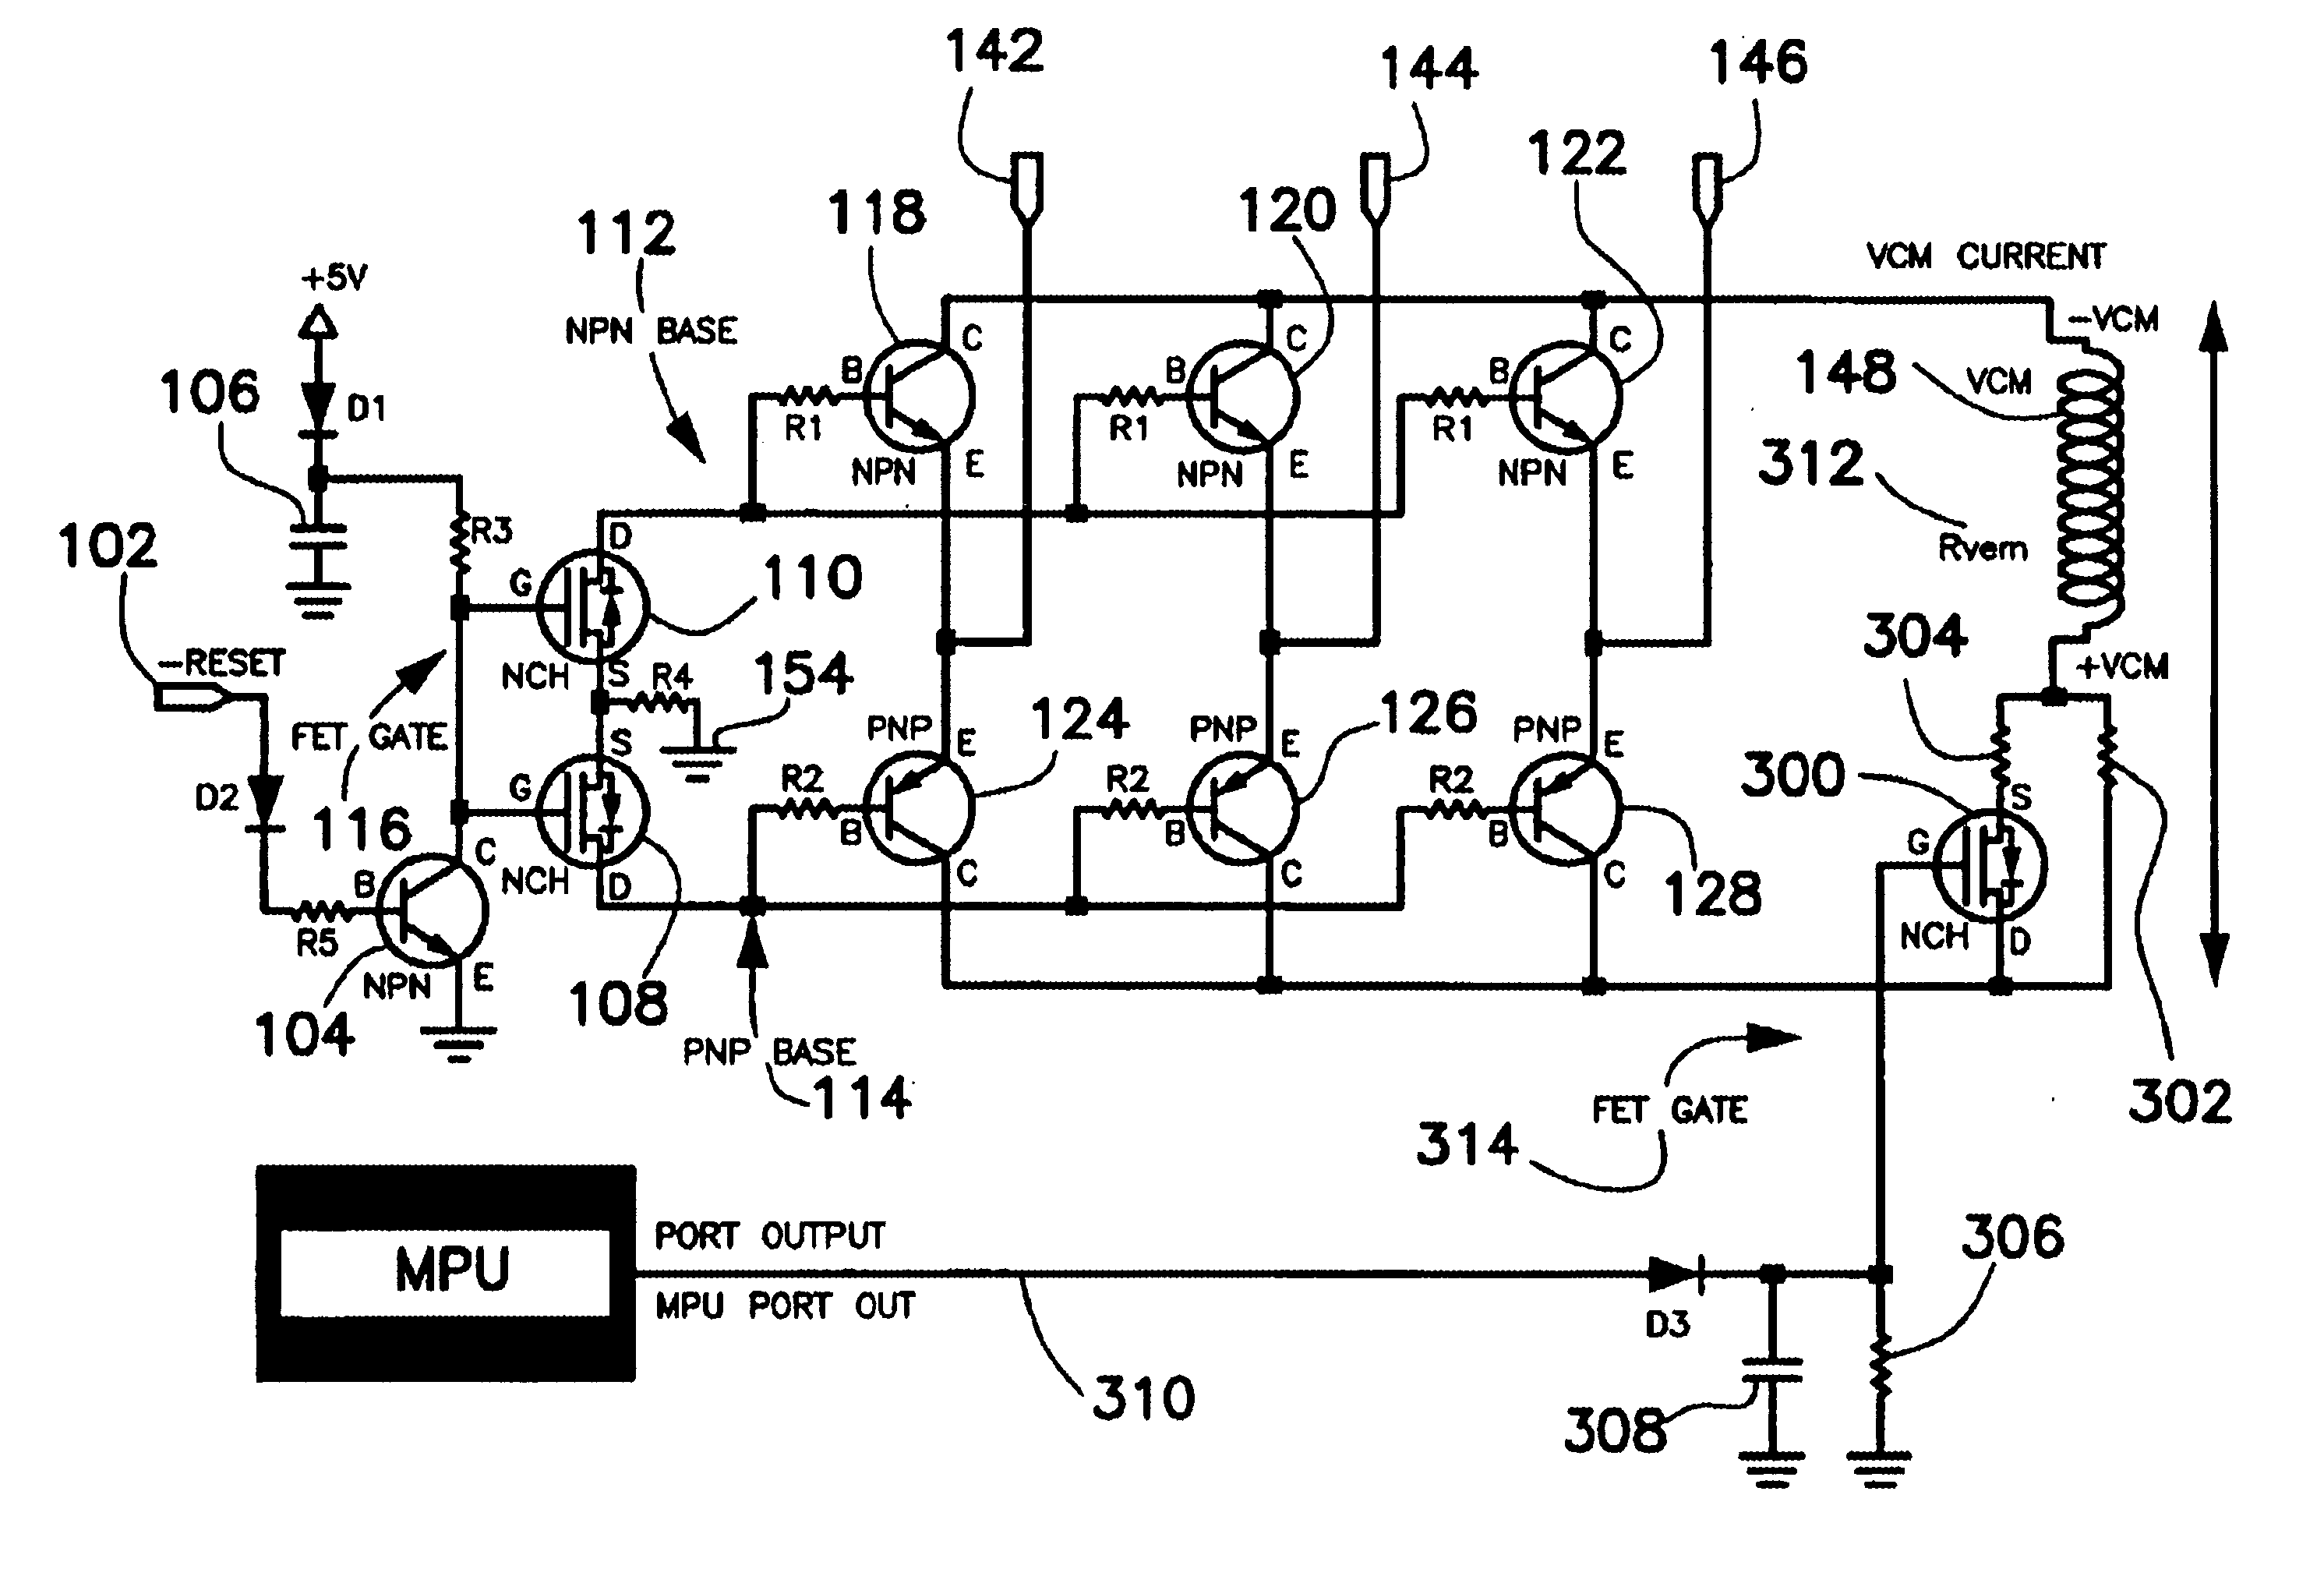 Actuator retract circuit for dual speed hard disk drive